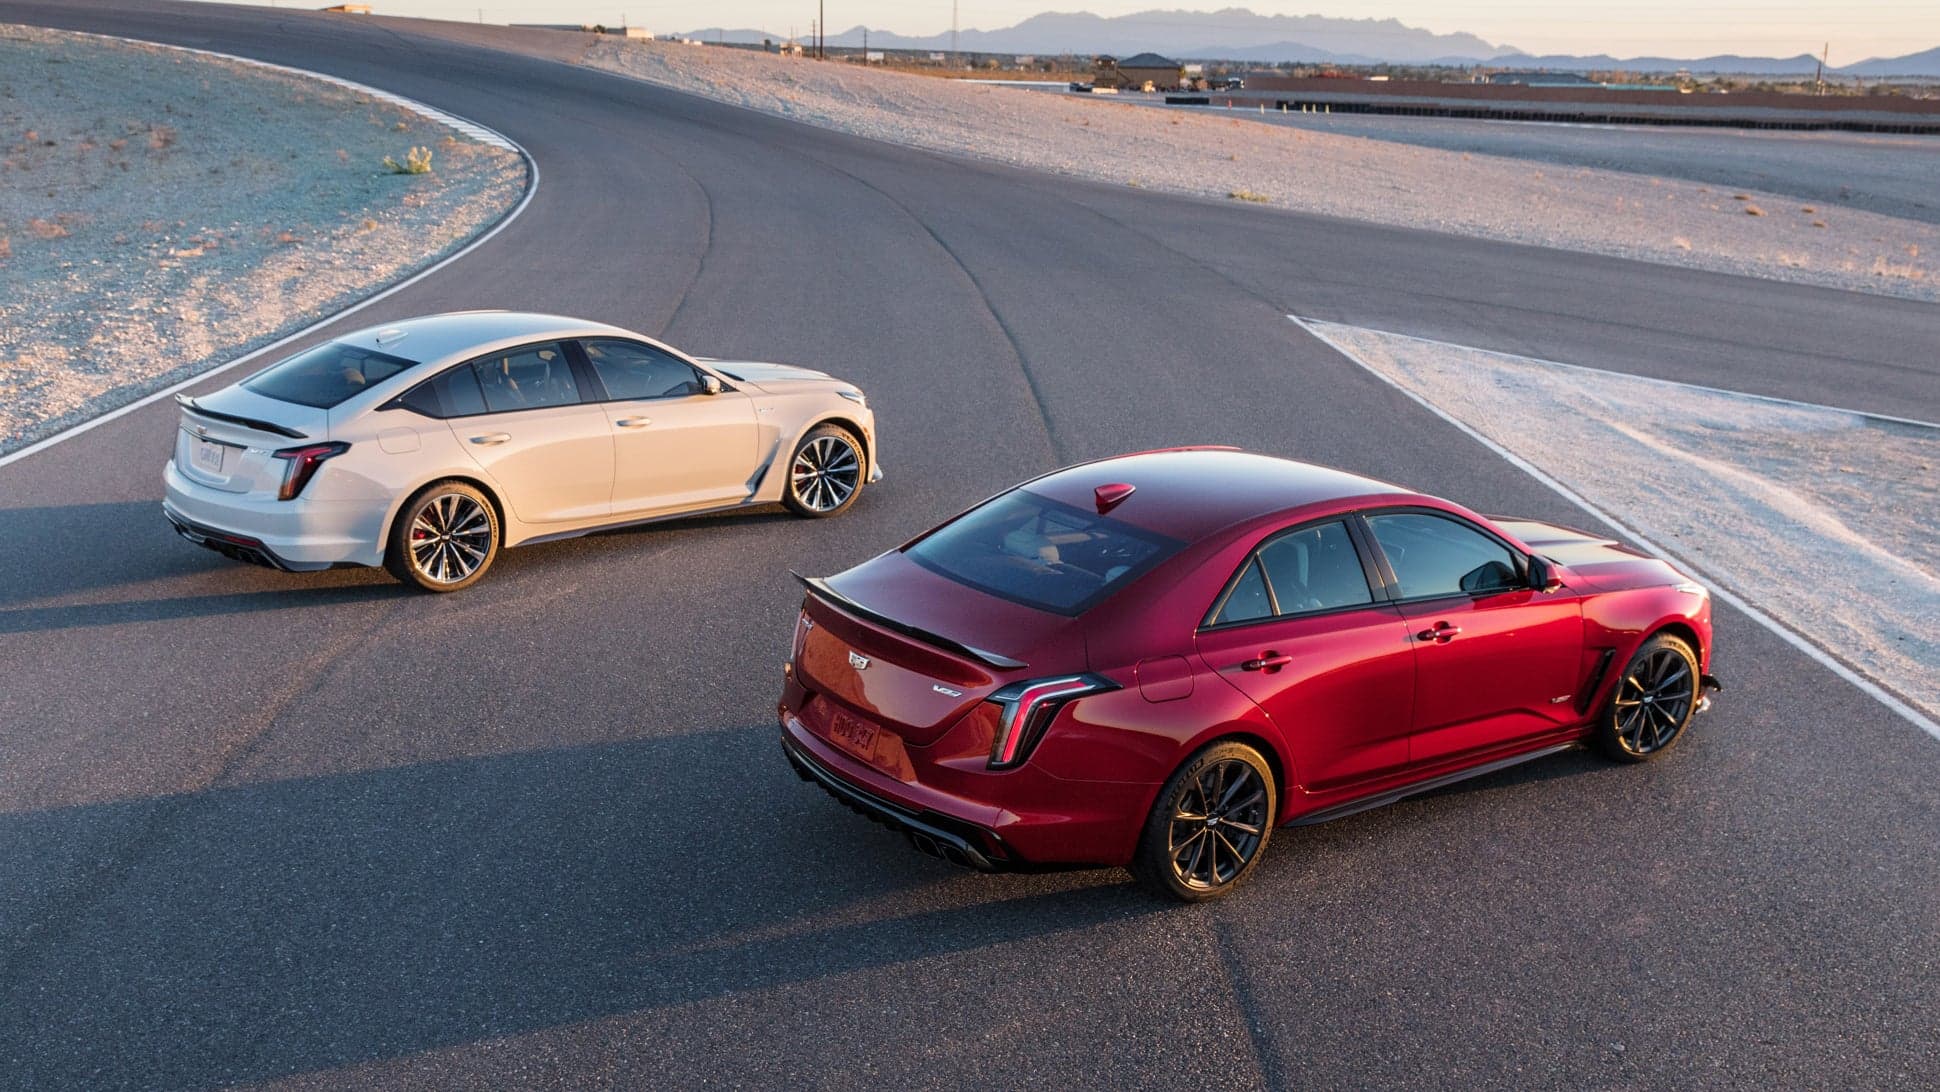 Cadillac Expects 25-35% of Its New Blackwing Performance Cars to Be Sold With a Manual